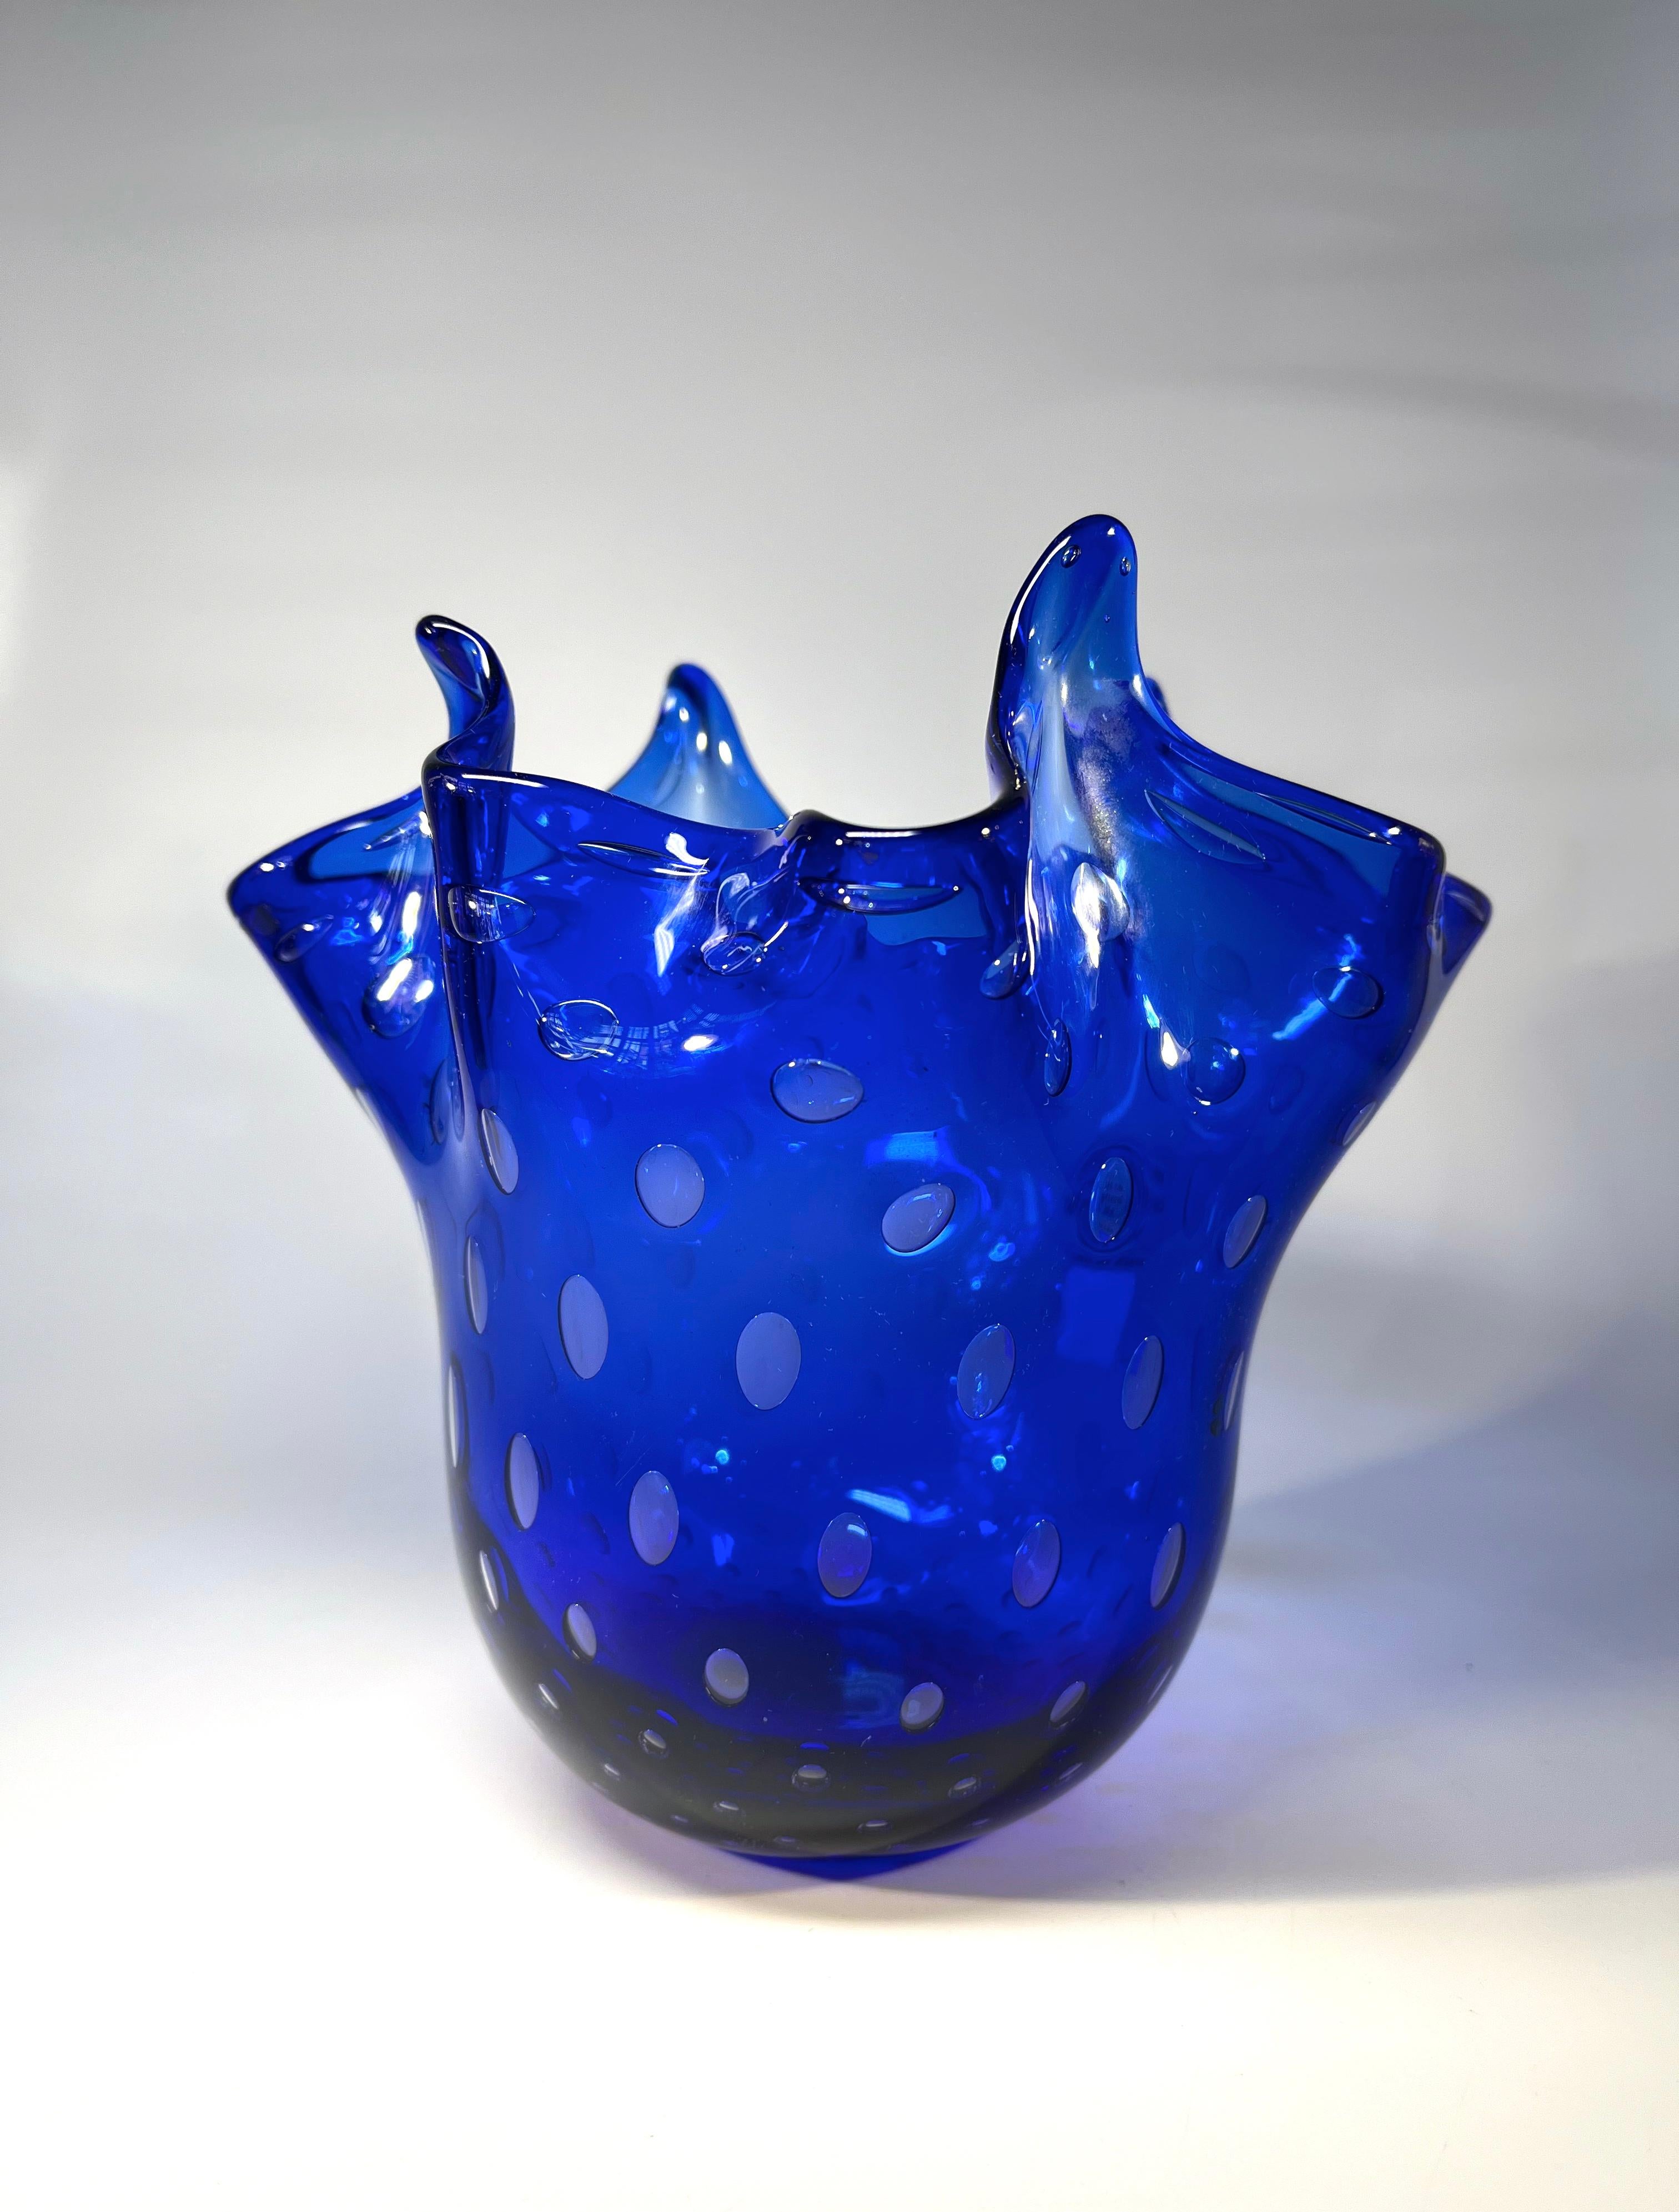 Fabulous lapis lazuli blue glass handkerchief vase from Gambaro & Poggi, Murano
Hand blown creating amazing texture and shape,  this is a stand out classic piece of vintage Italian art glass
Circa 1974
Signed to base. Has original labels
Height 7